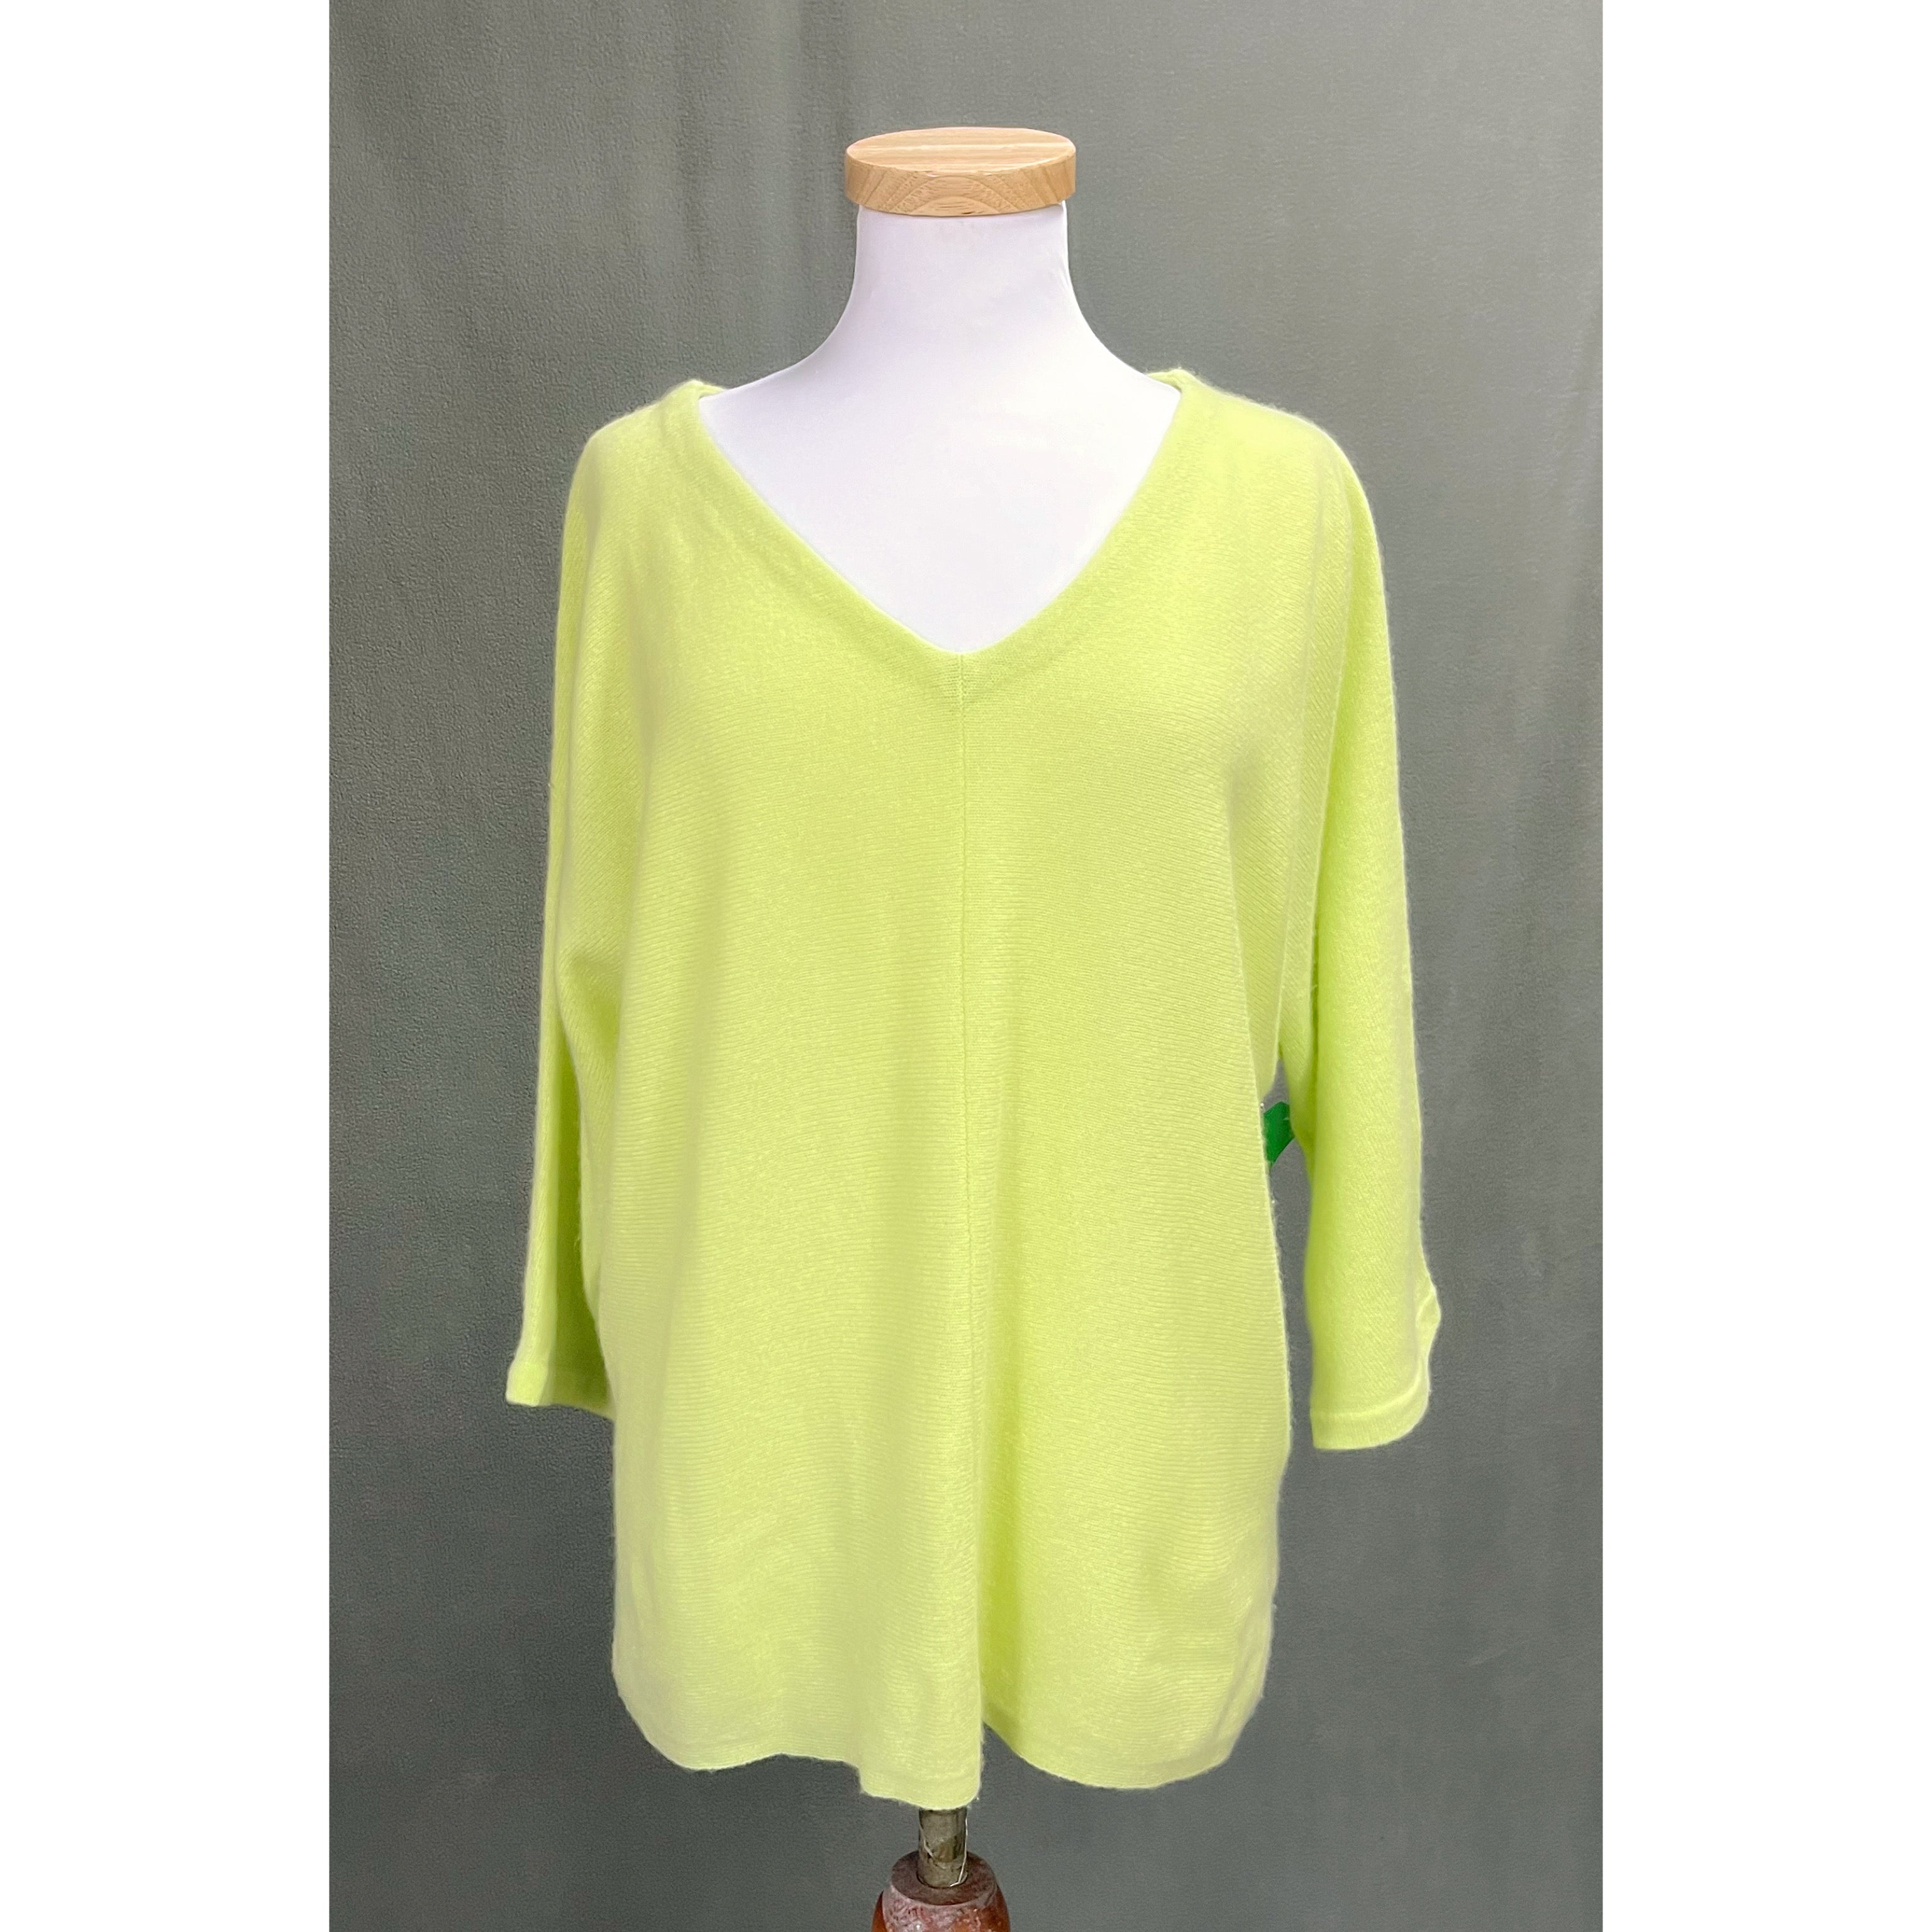 Pure lime cashmere sweater, size 12